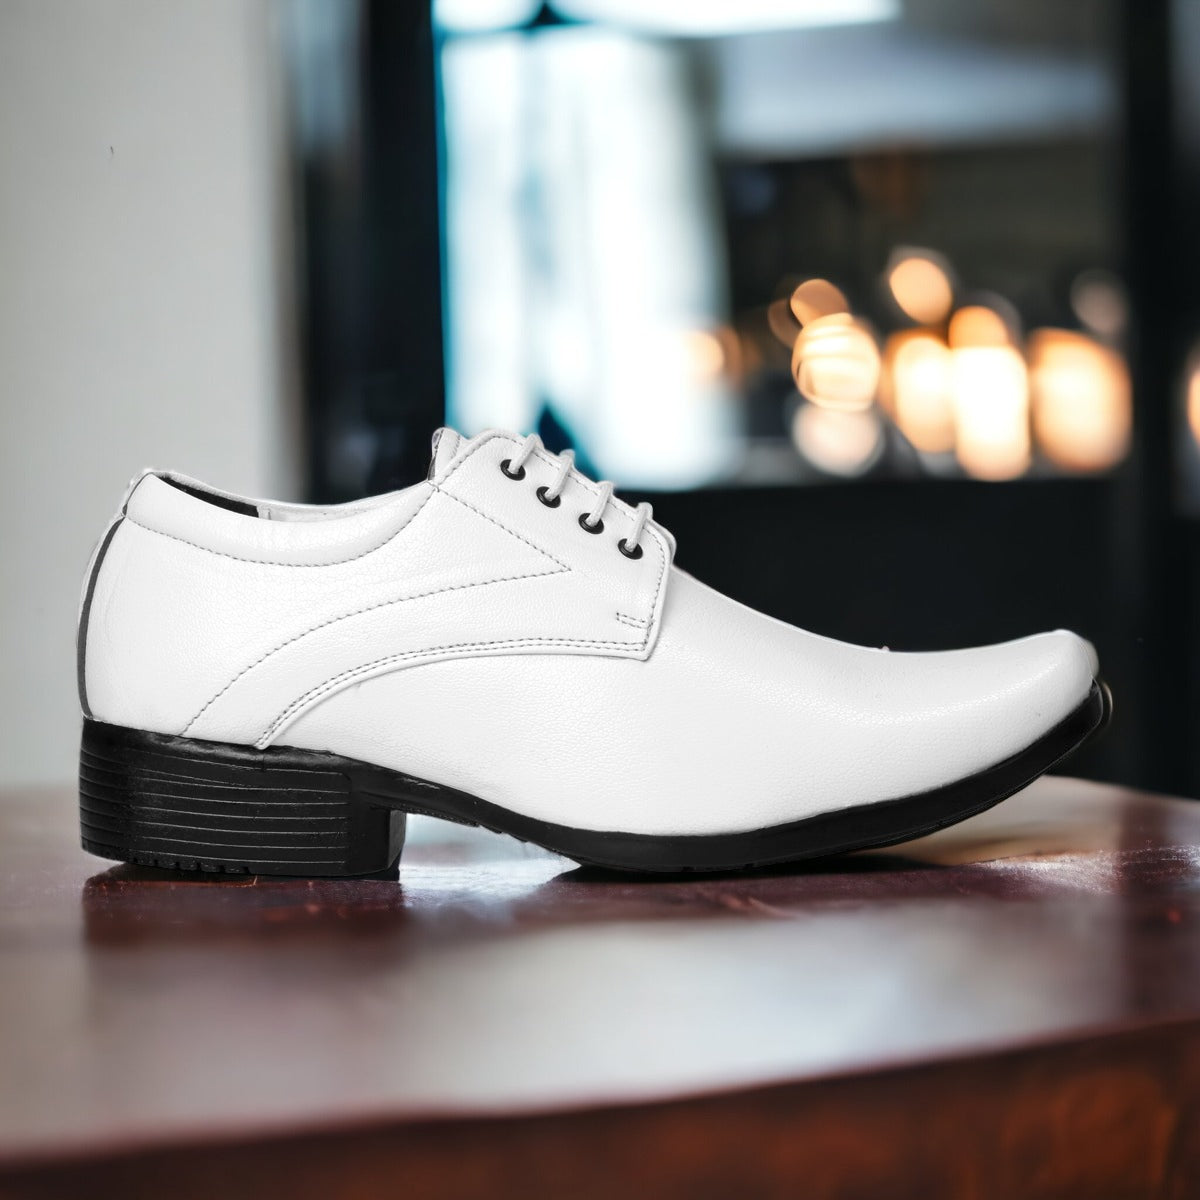 Jack Marc's Formal Derby Lace-Up White Shoes for Men